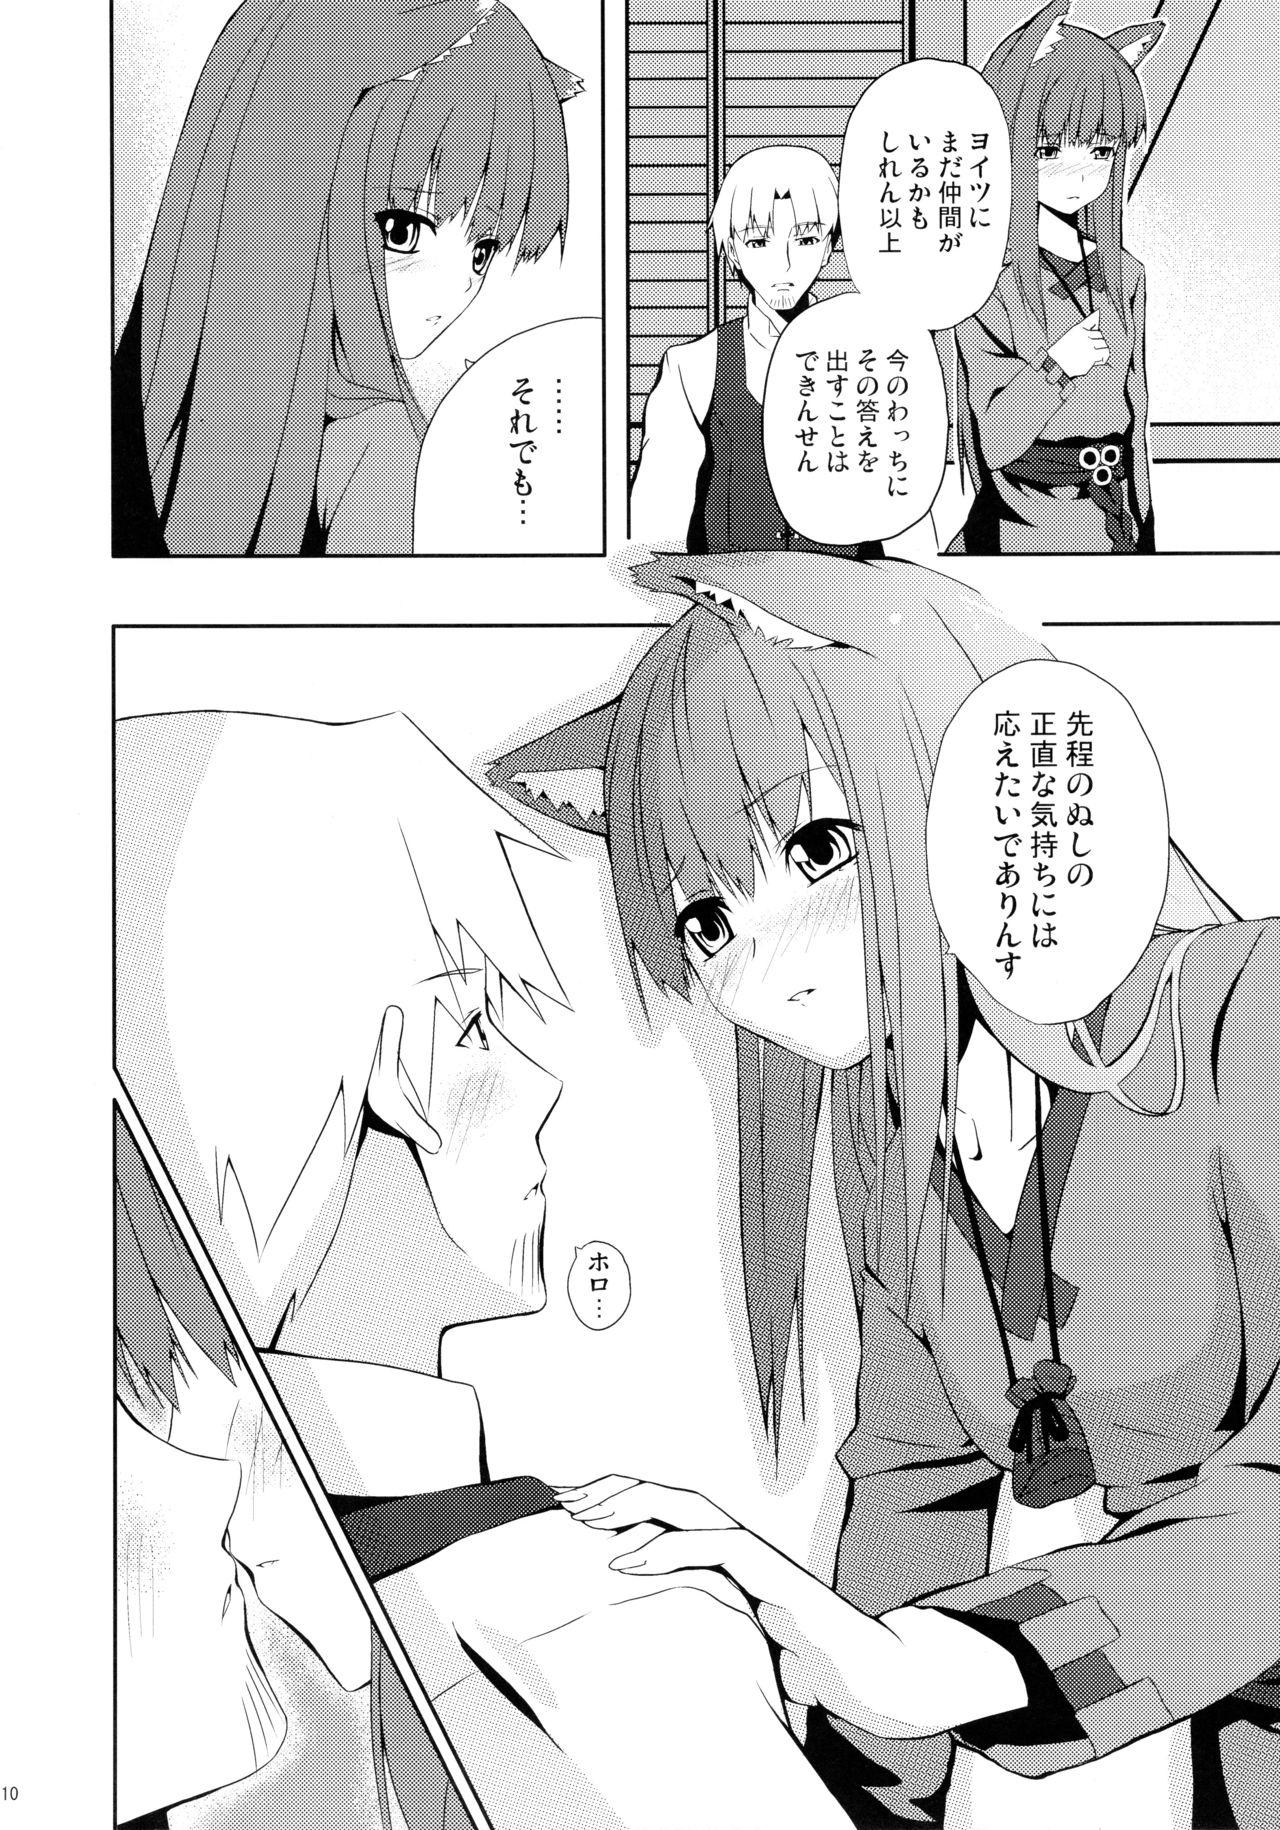 Face Fuck Bitter Apple - Spice and wolf Ameteur Porn - Page 10